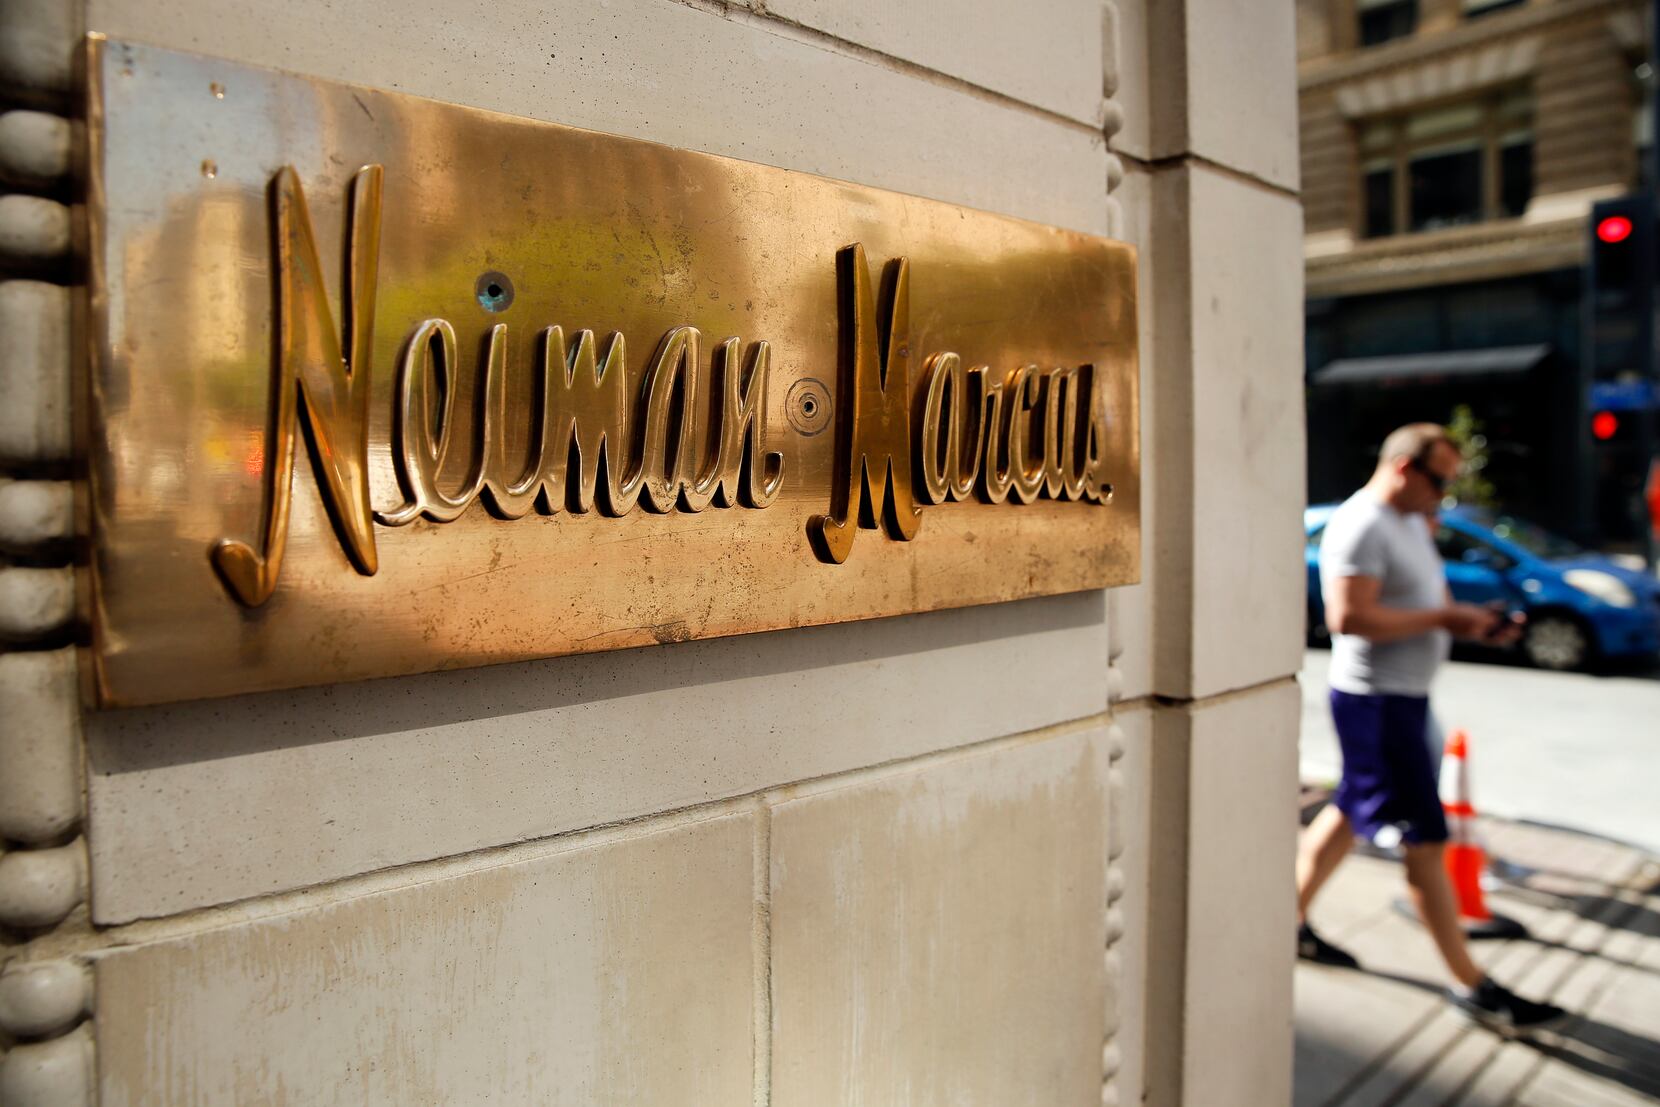 Which is the better store, Neiman Marcus or Saks? - Quora